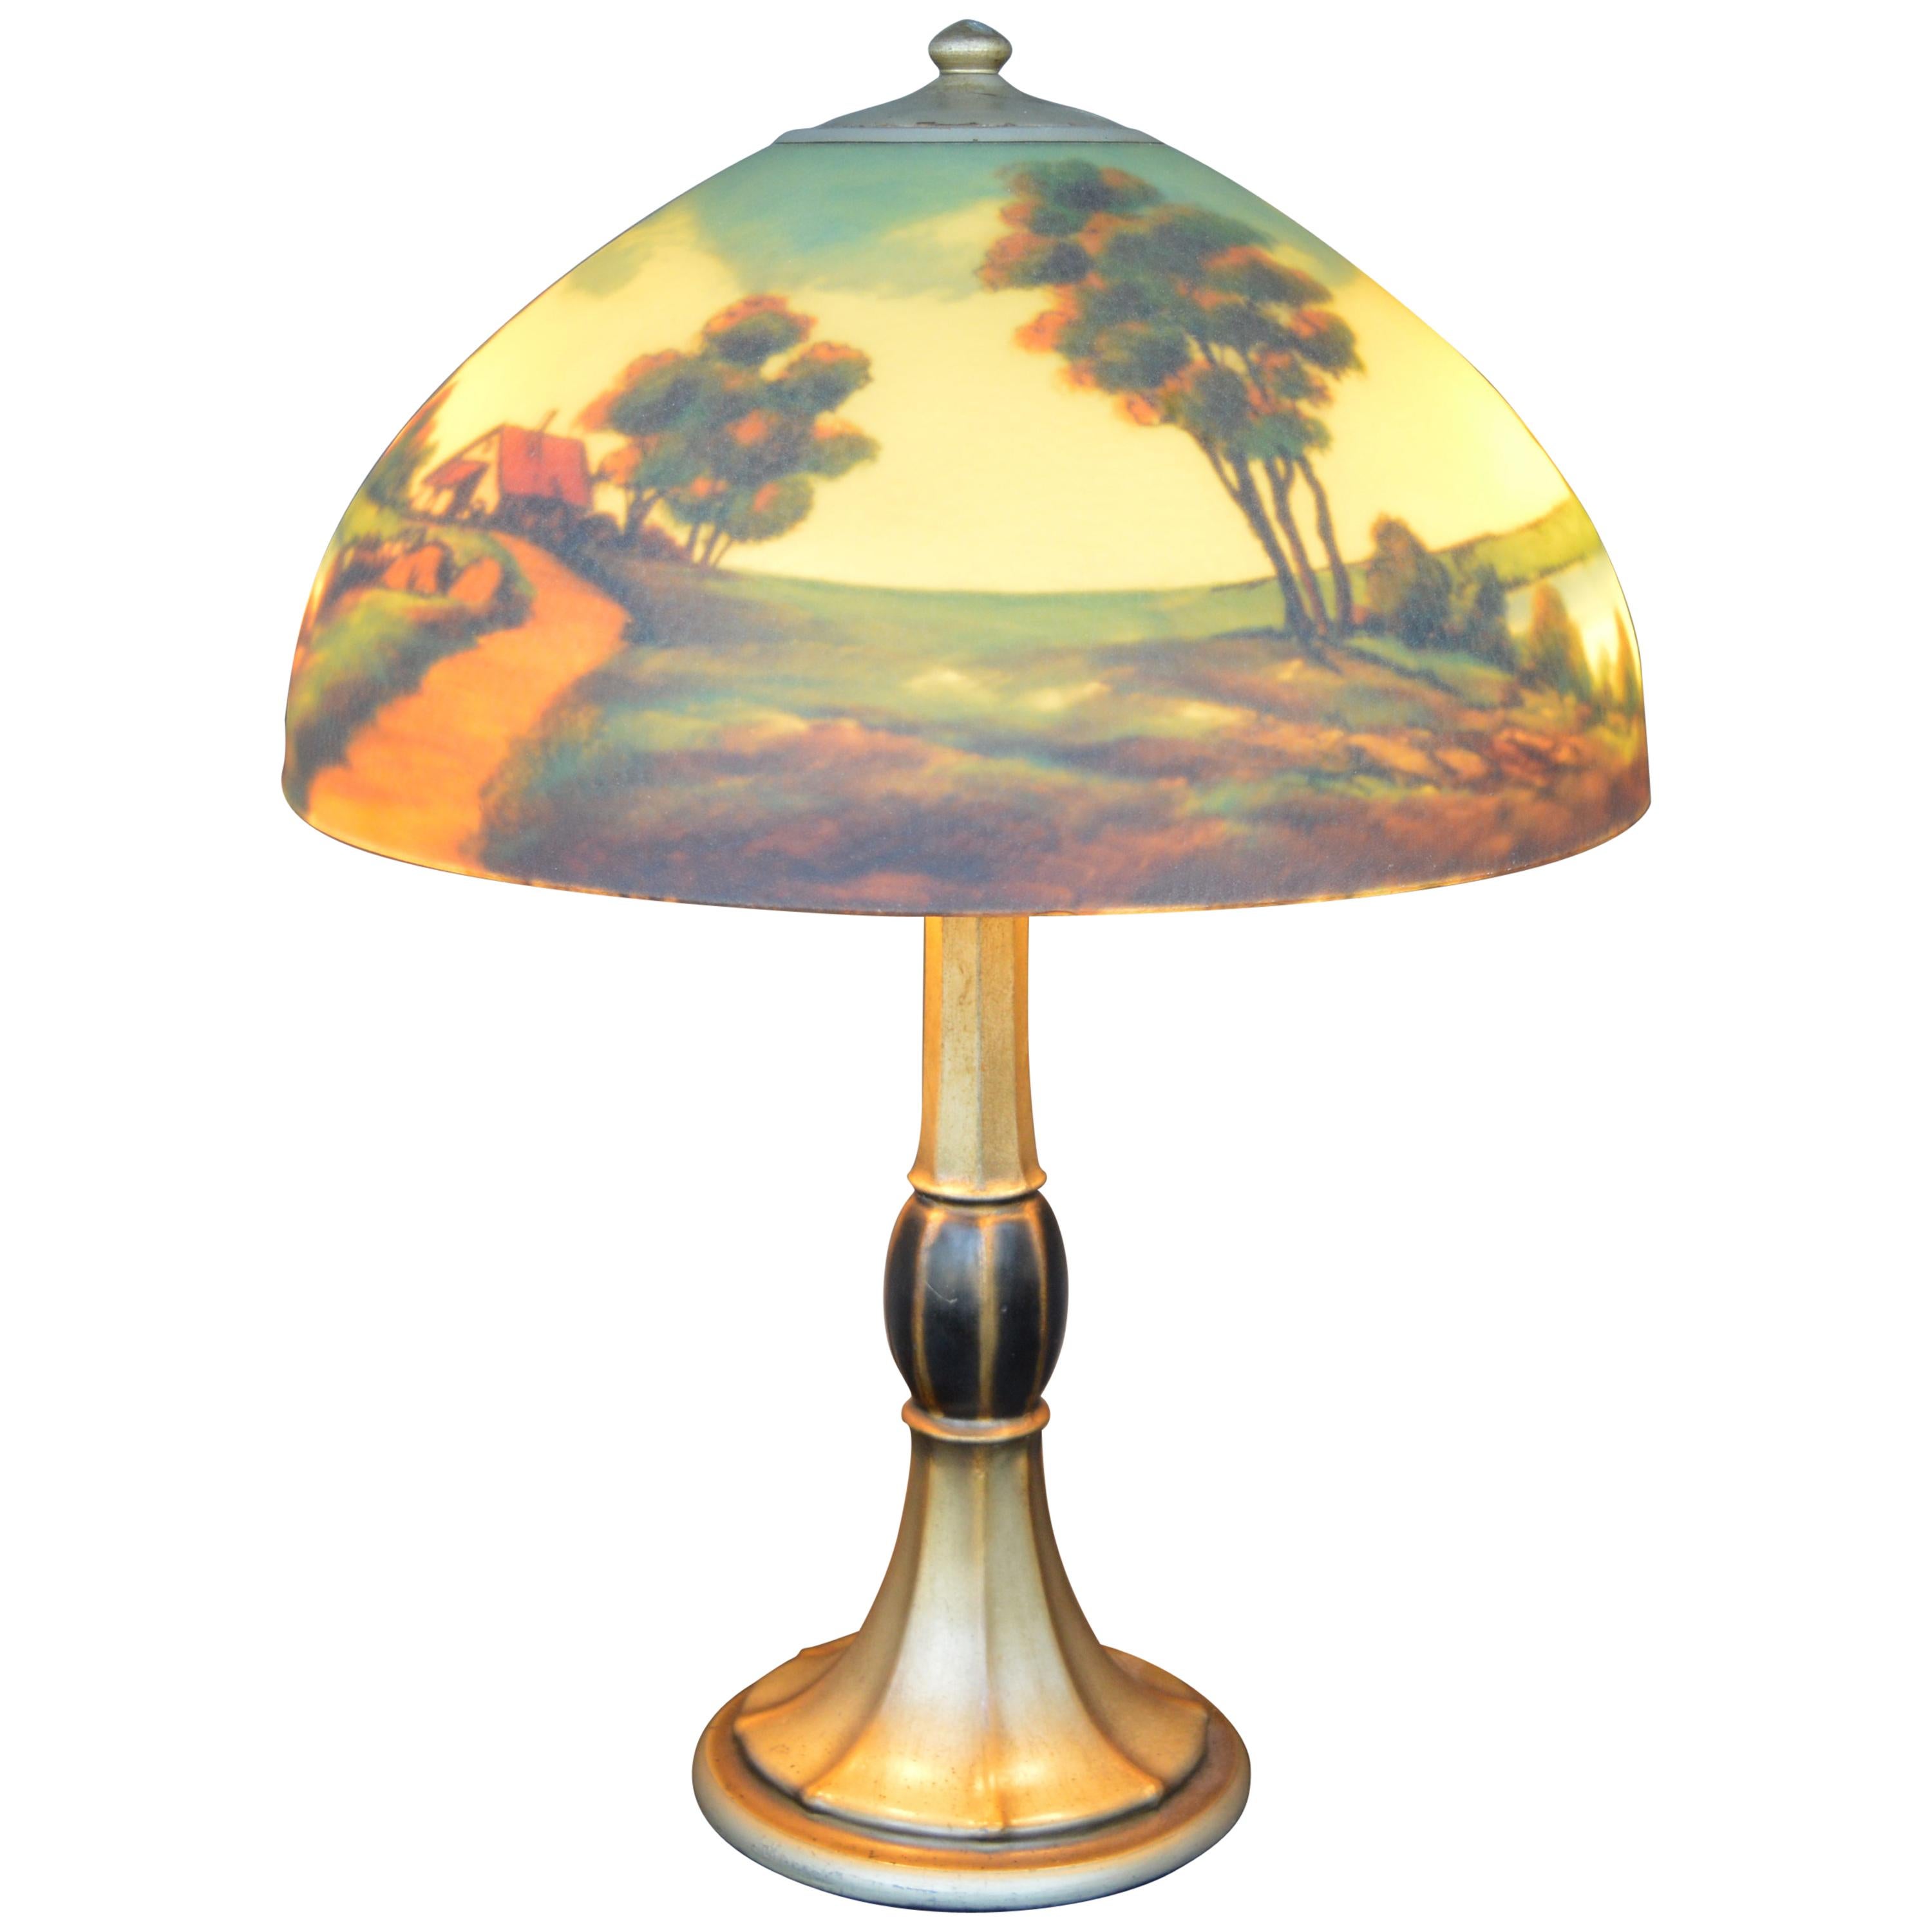 Pittsburgh Jefferson Lakeside Cottage Table Lamp